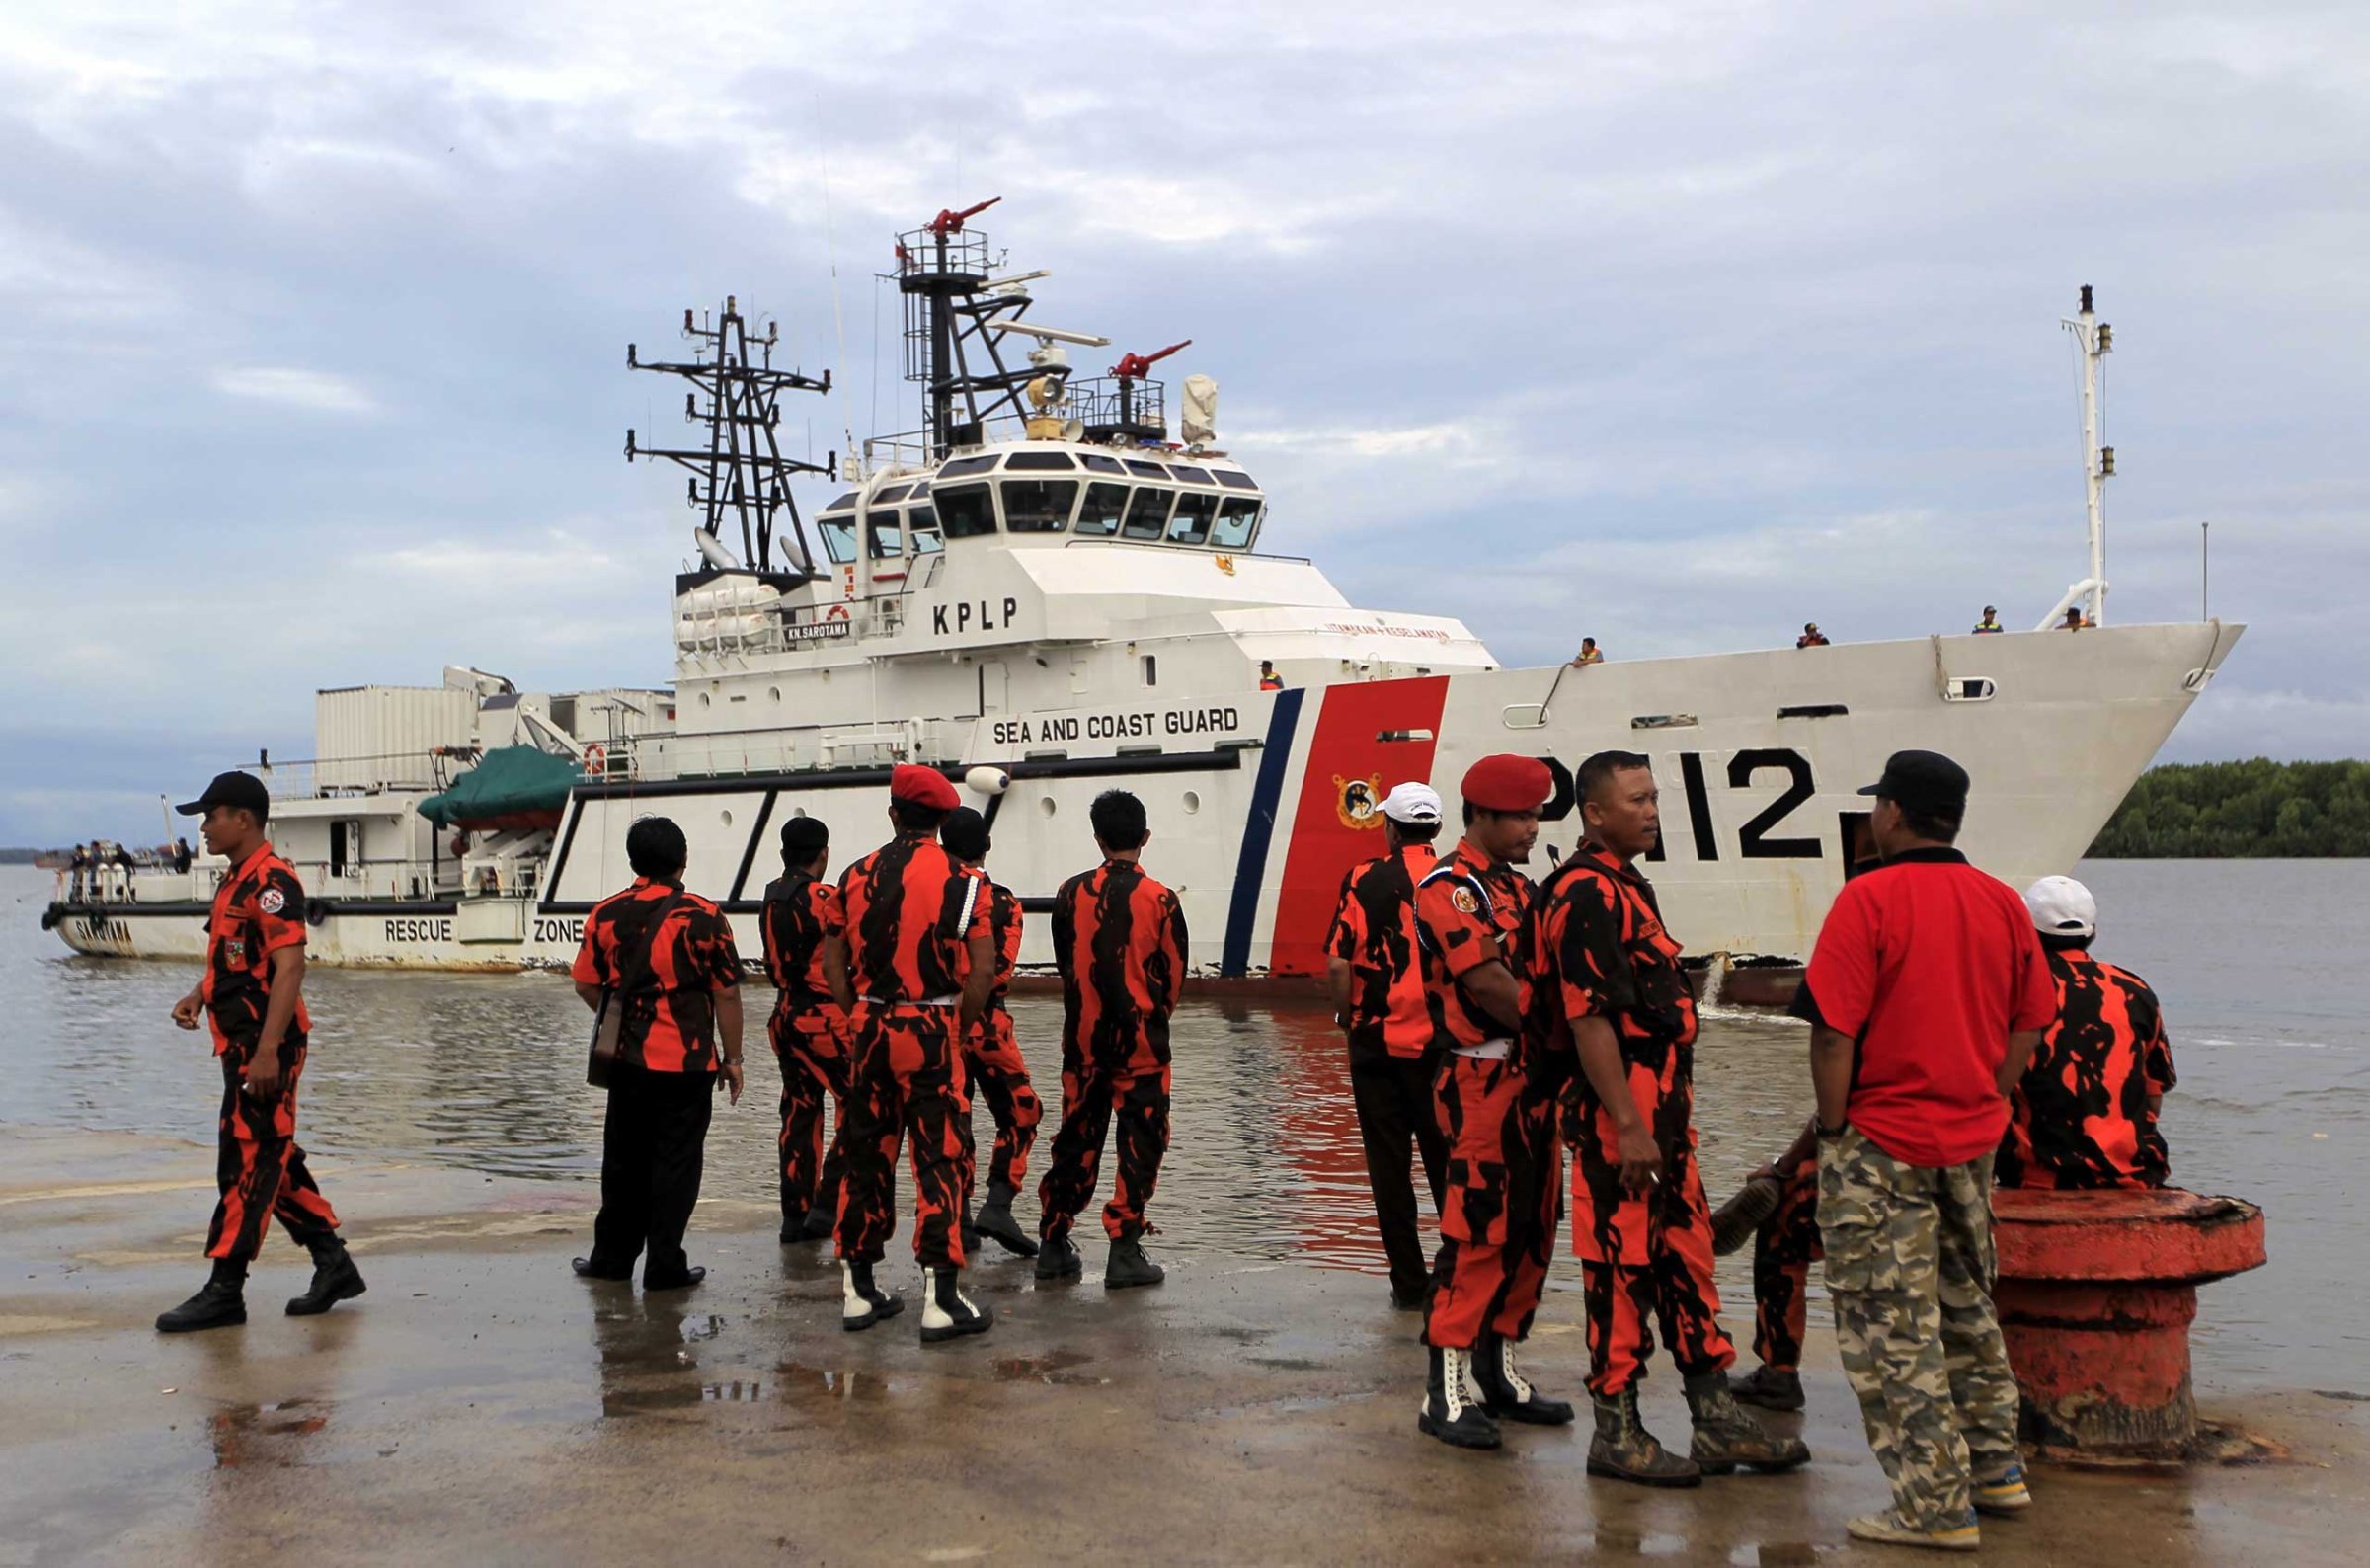 Indonesia's Sea and Coast Guard ship during a search and rescue operation as they search for the missing AirAsia plane on Dec. 31.